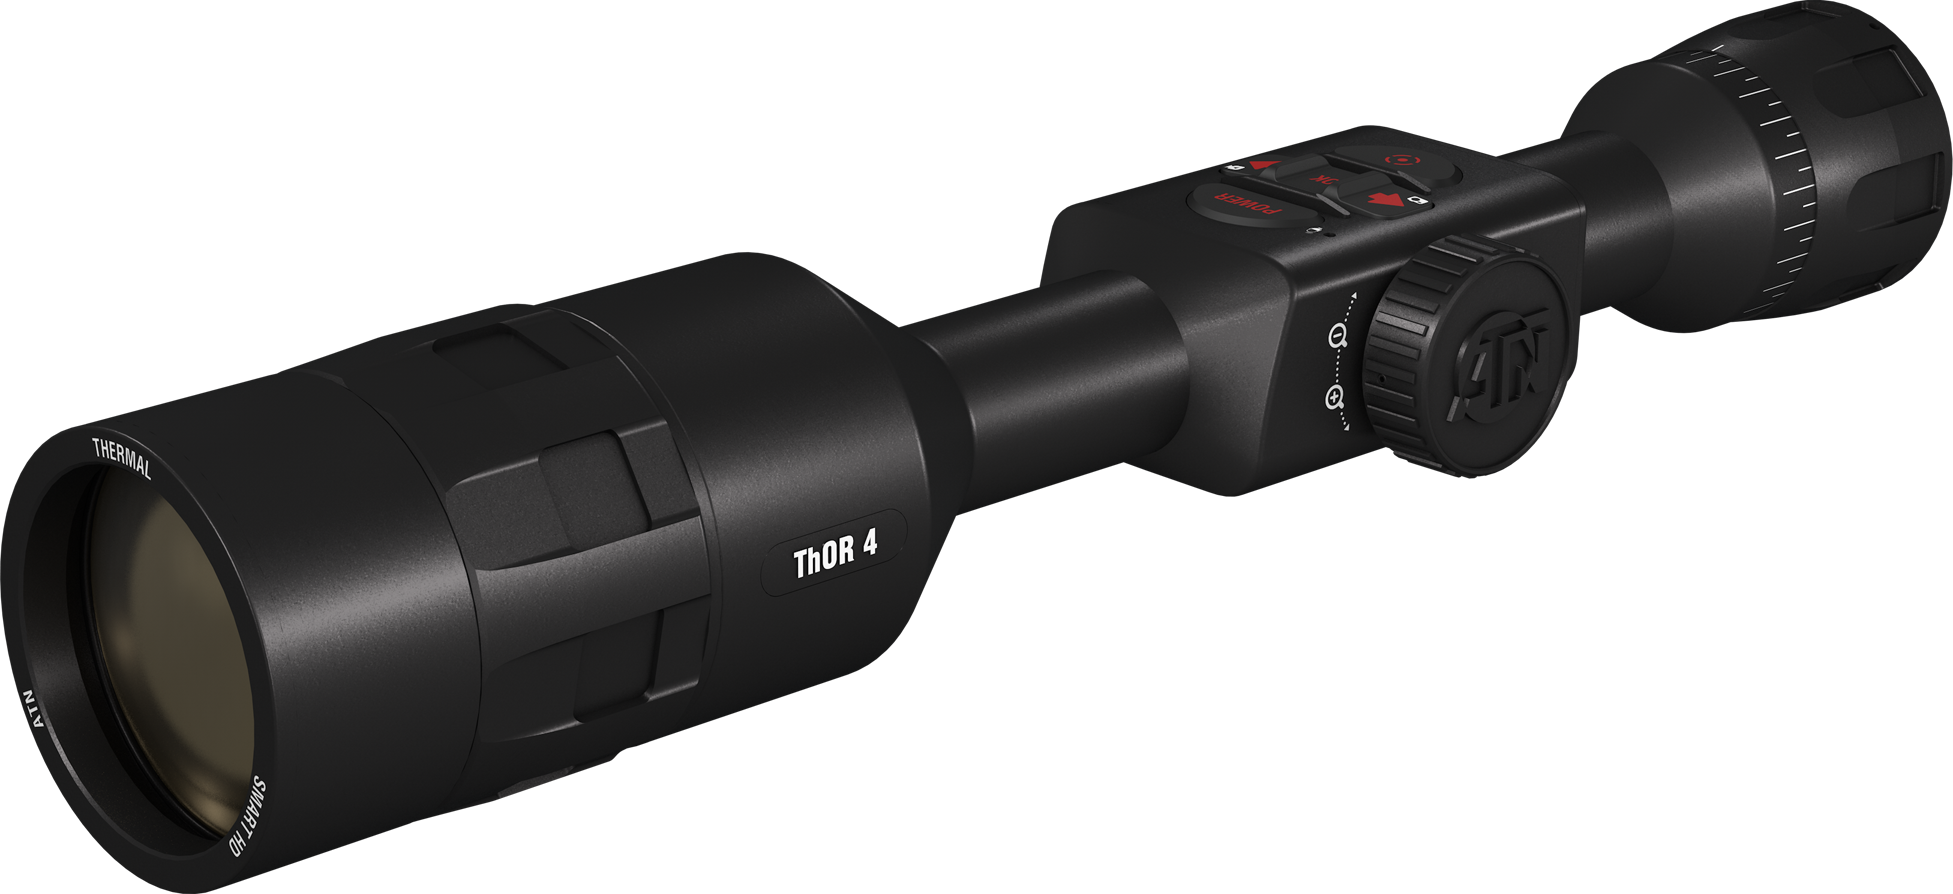 ATN ThOR 4 7-28x75mm Thermal Smart HD Rifle Scope | 4.5 Star Rating w/ Free  Shipping